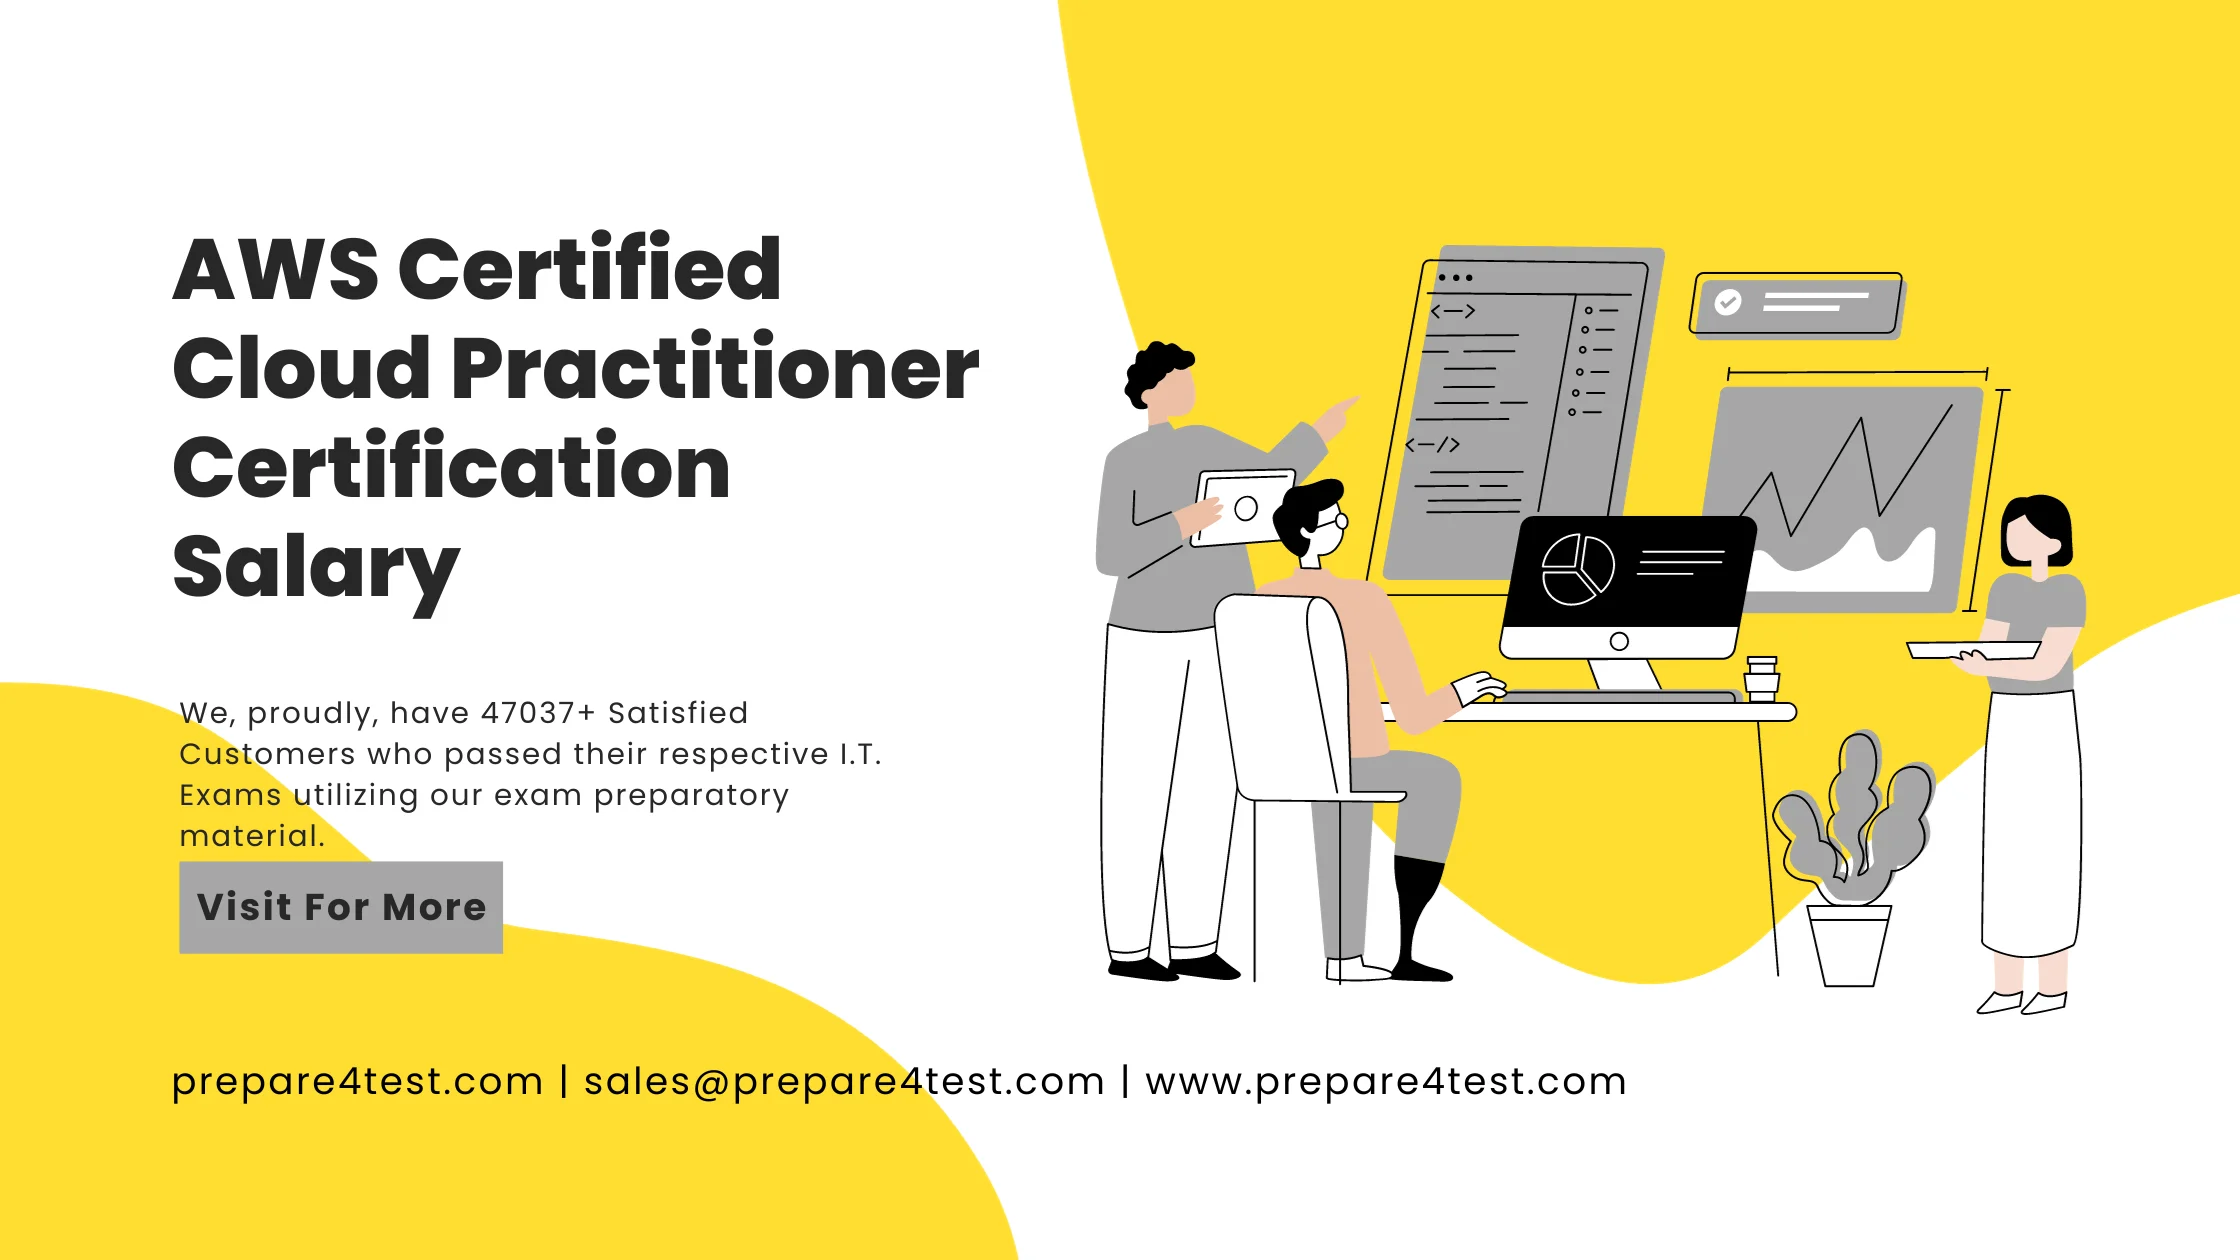 AWS Certified Cloud Practitioner Certification Salary guarantee